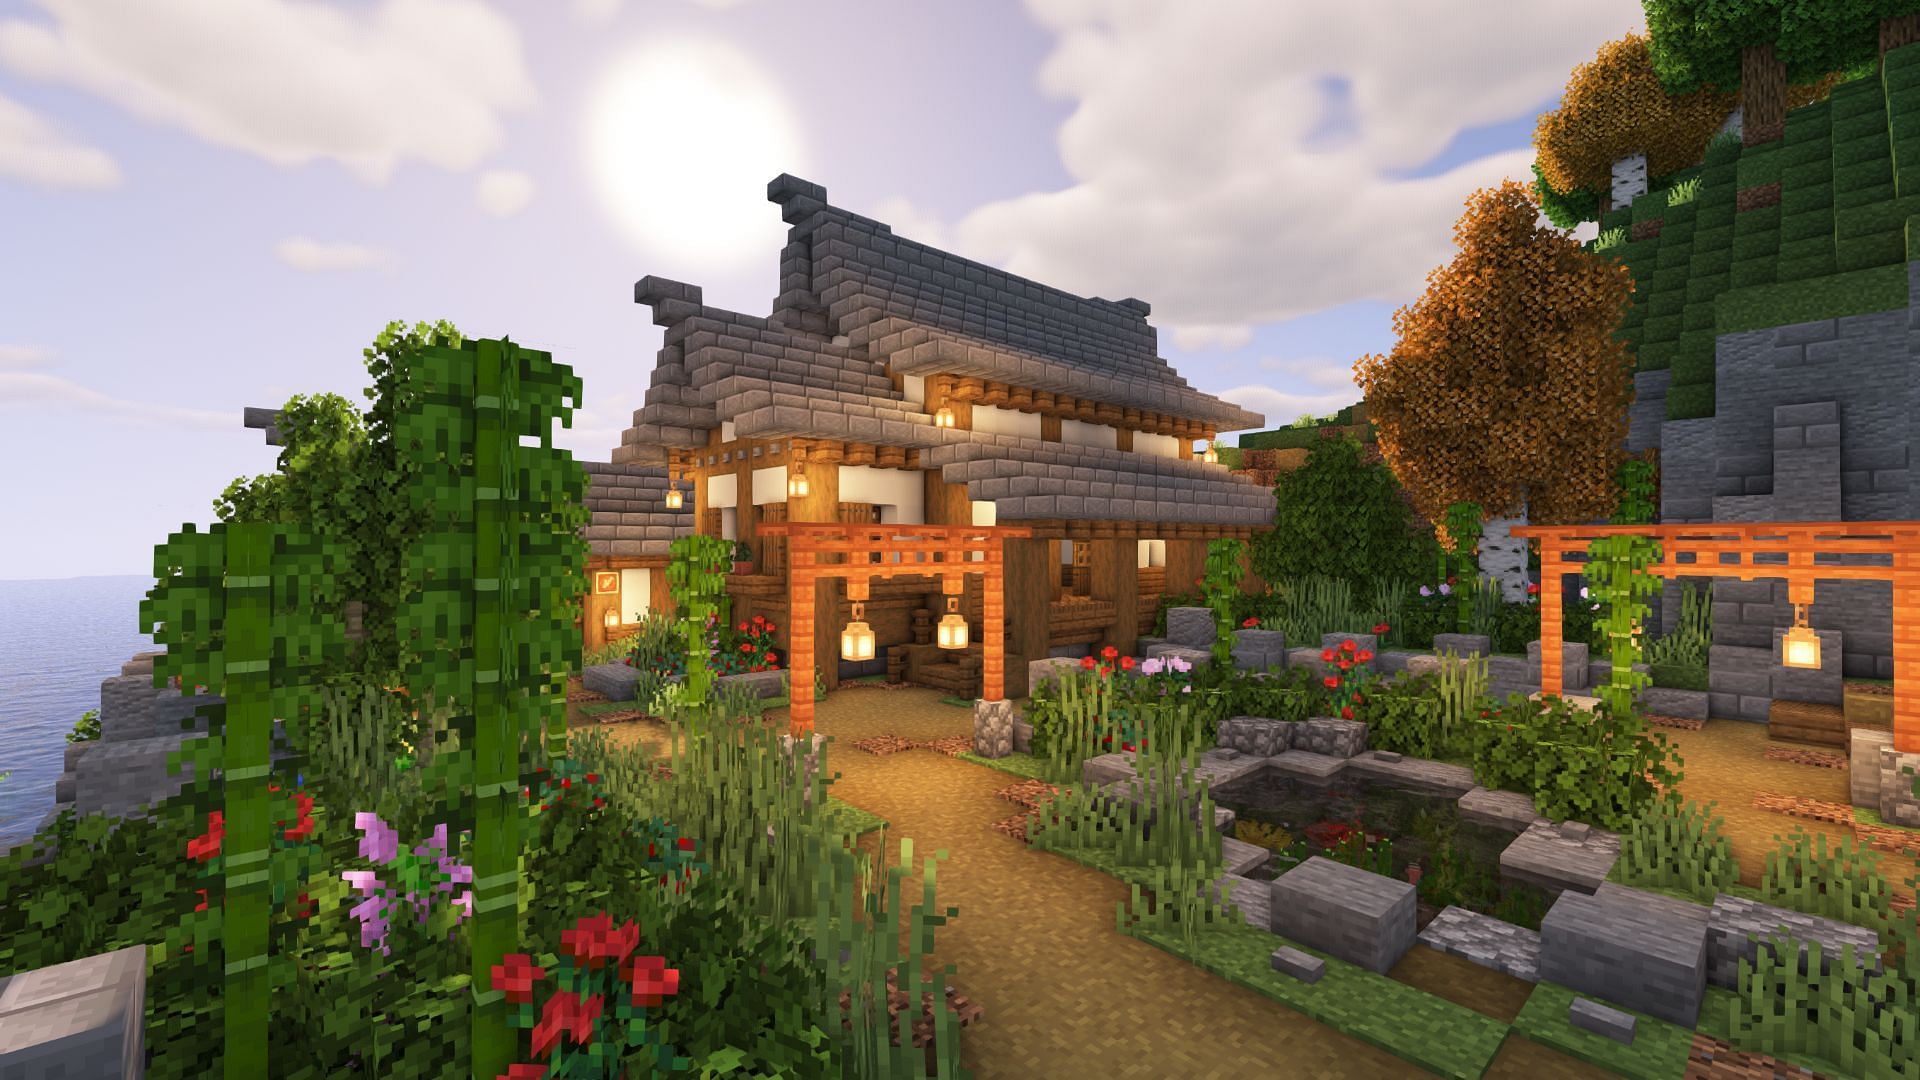 A Japanese house in Minecraft (Image via Minecraft)